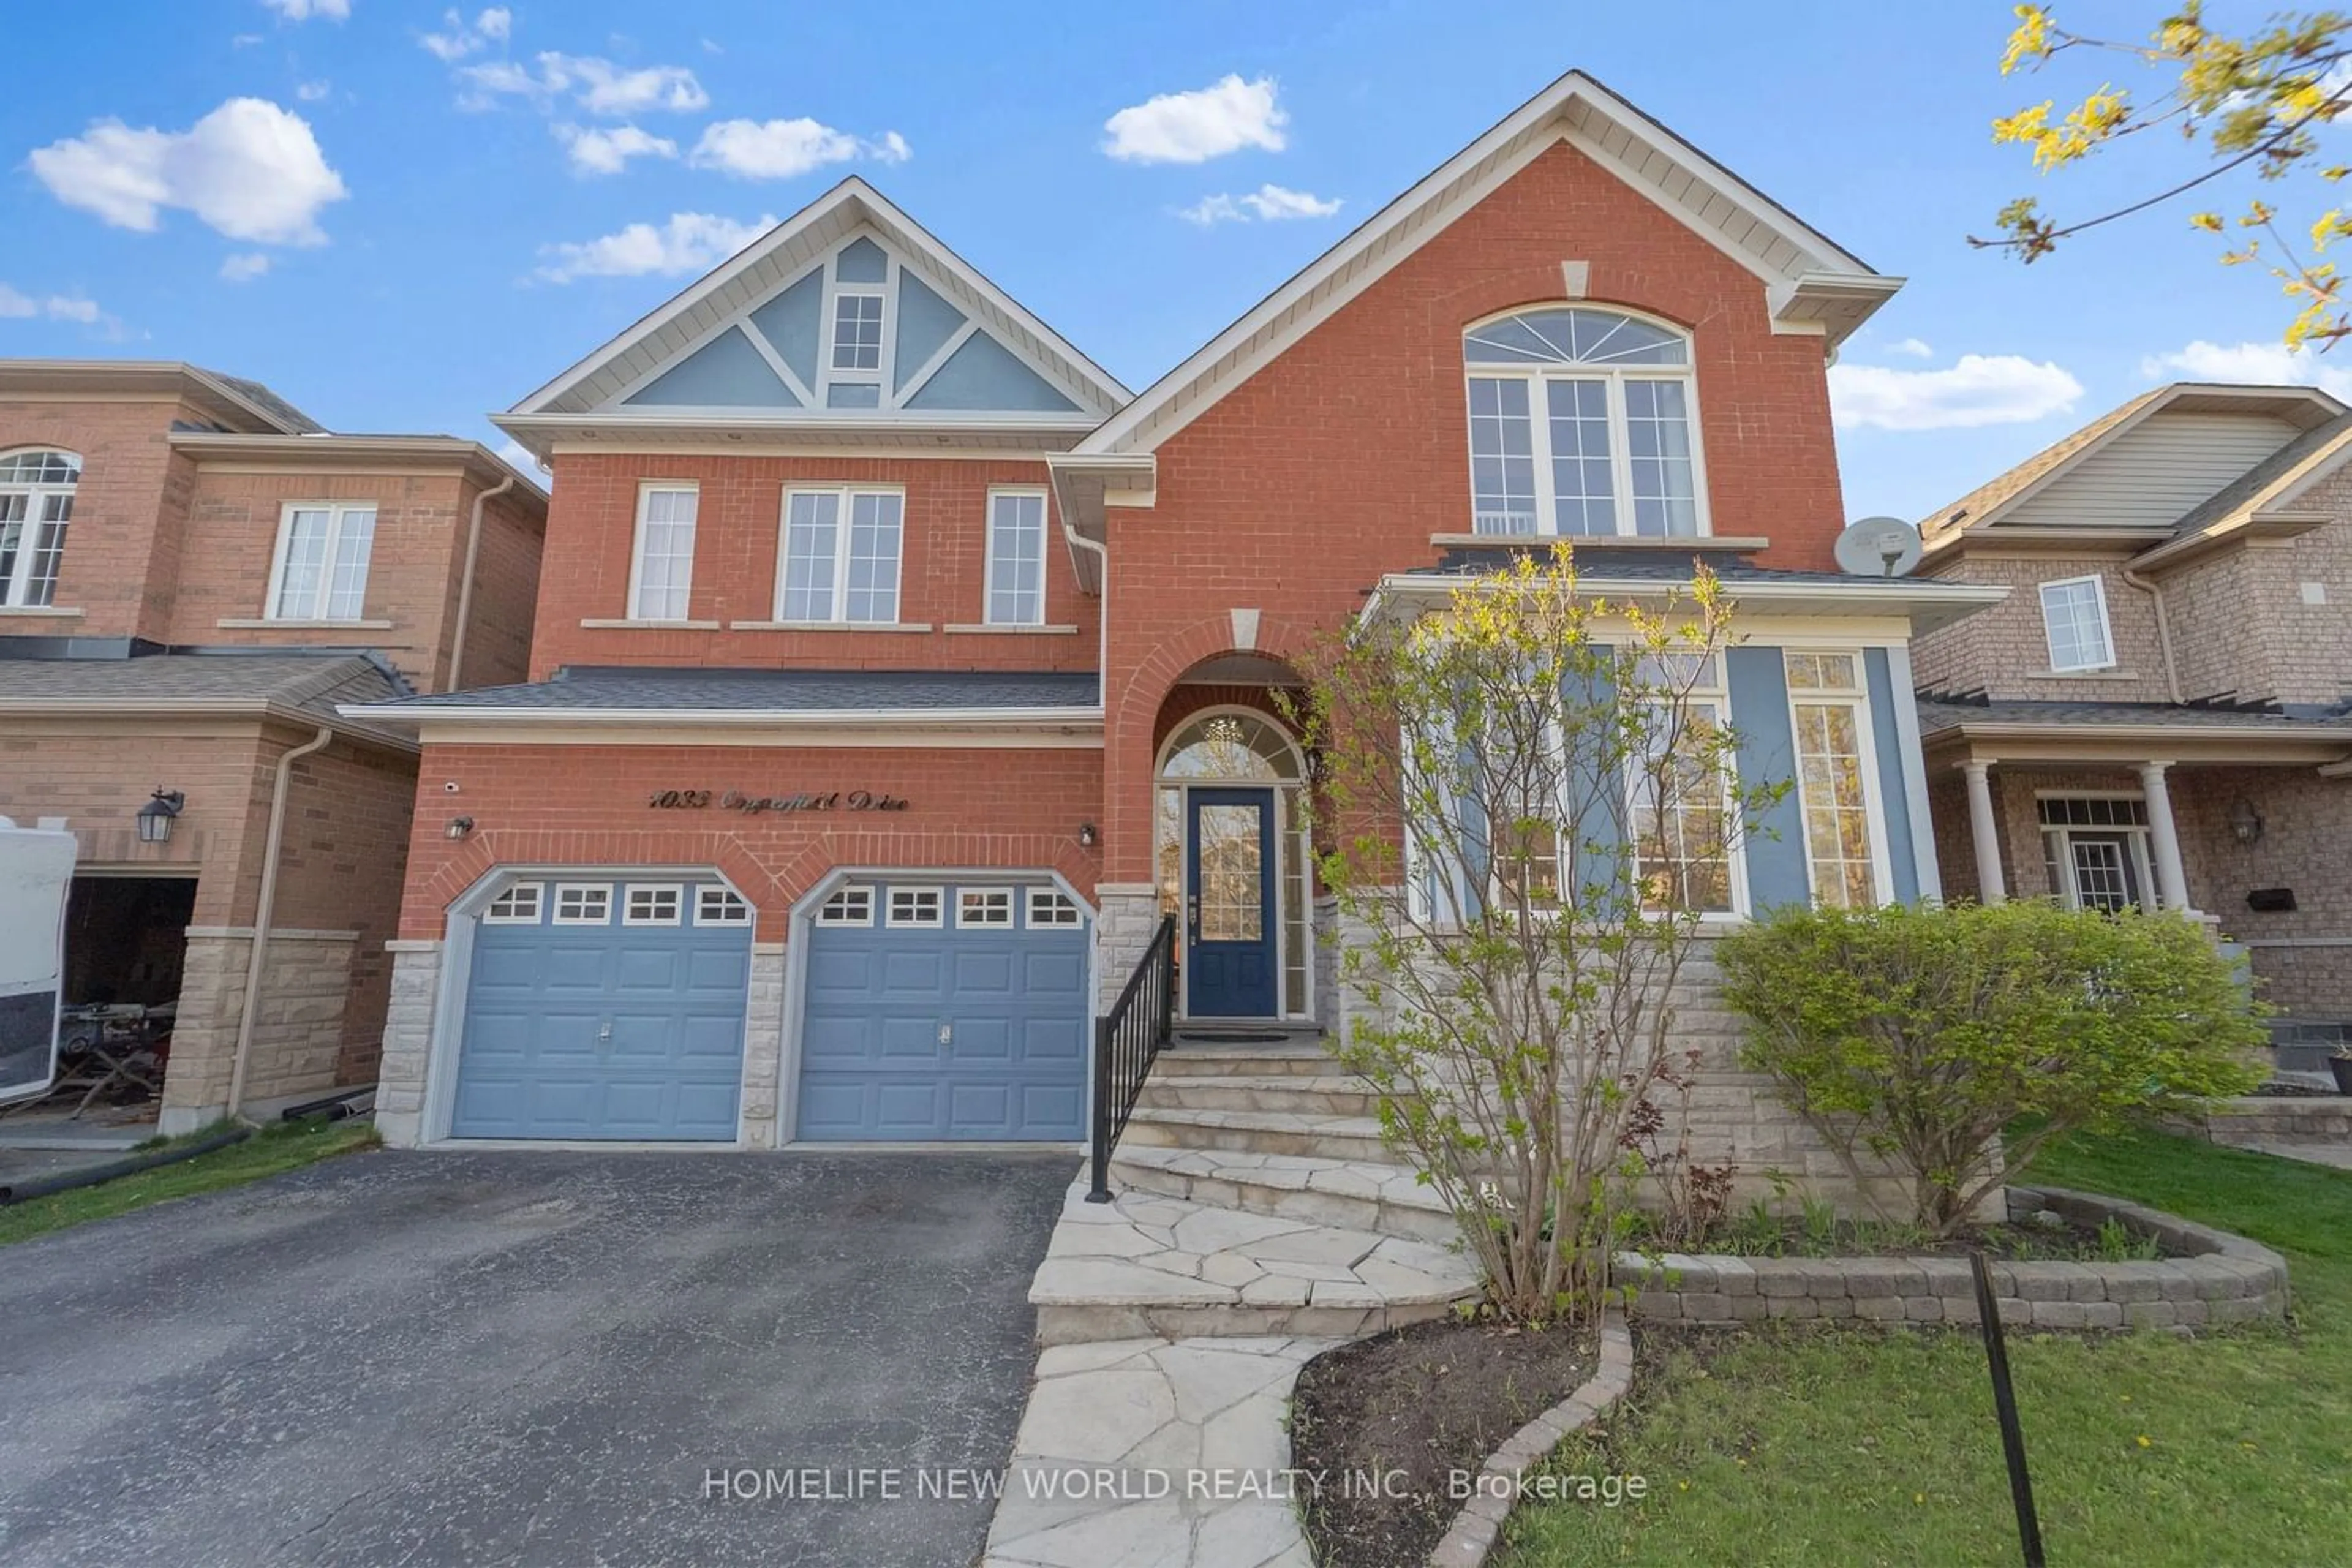 Home with brick exterior material for 1033 Copperfield Dr, Oshawa Ontario L1K 3C4